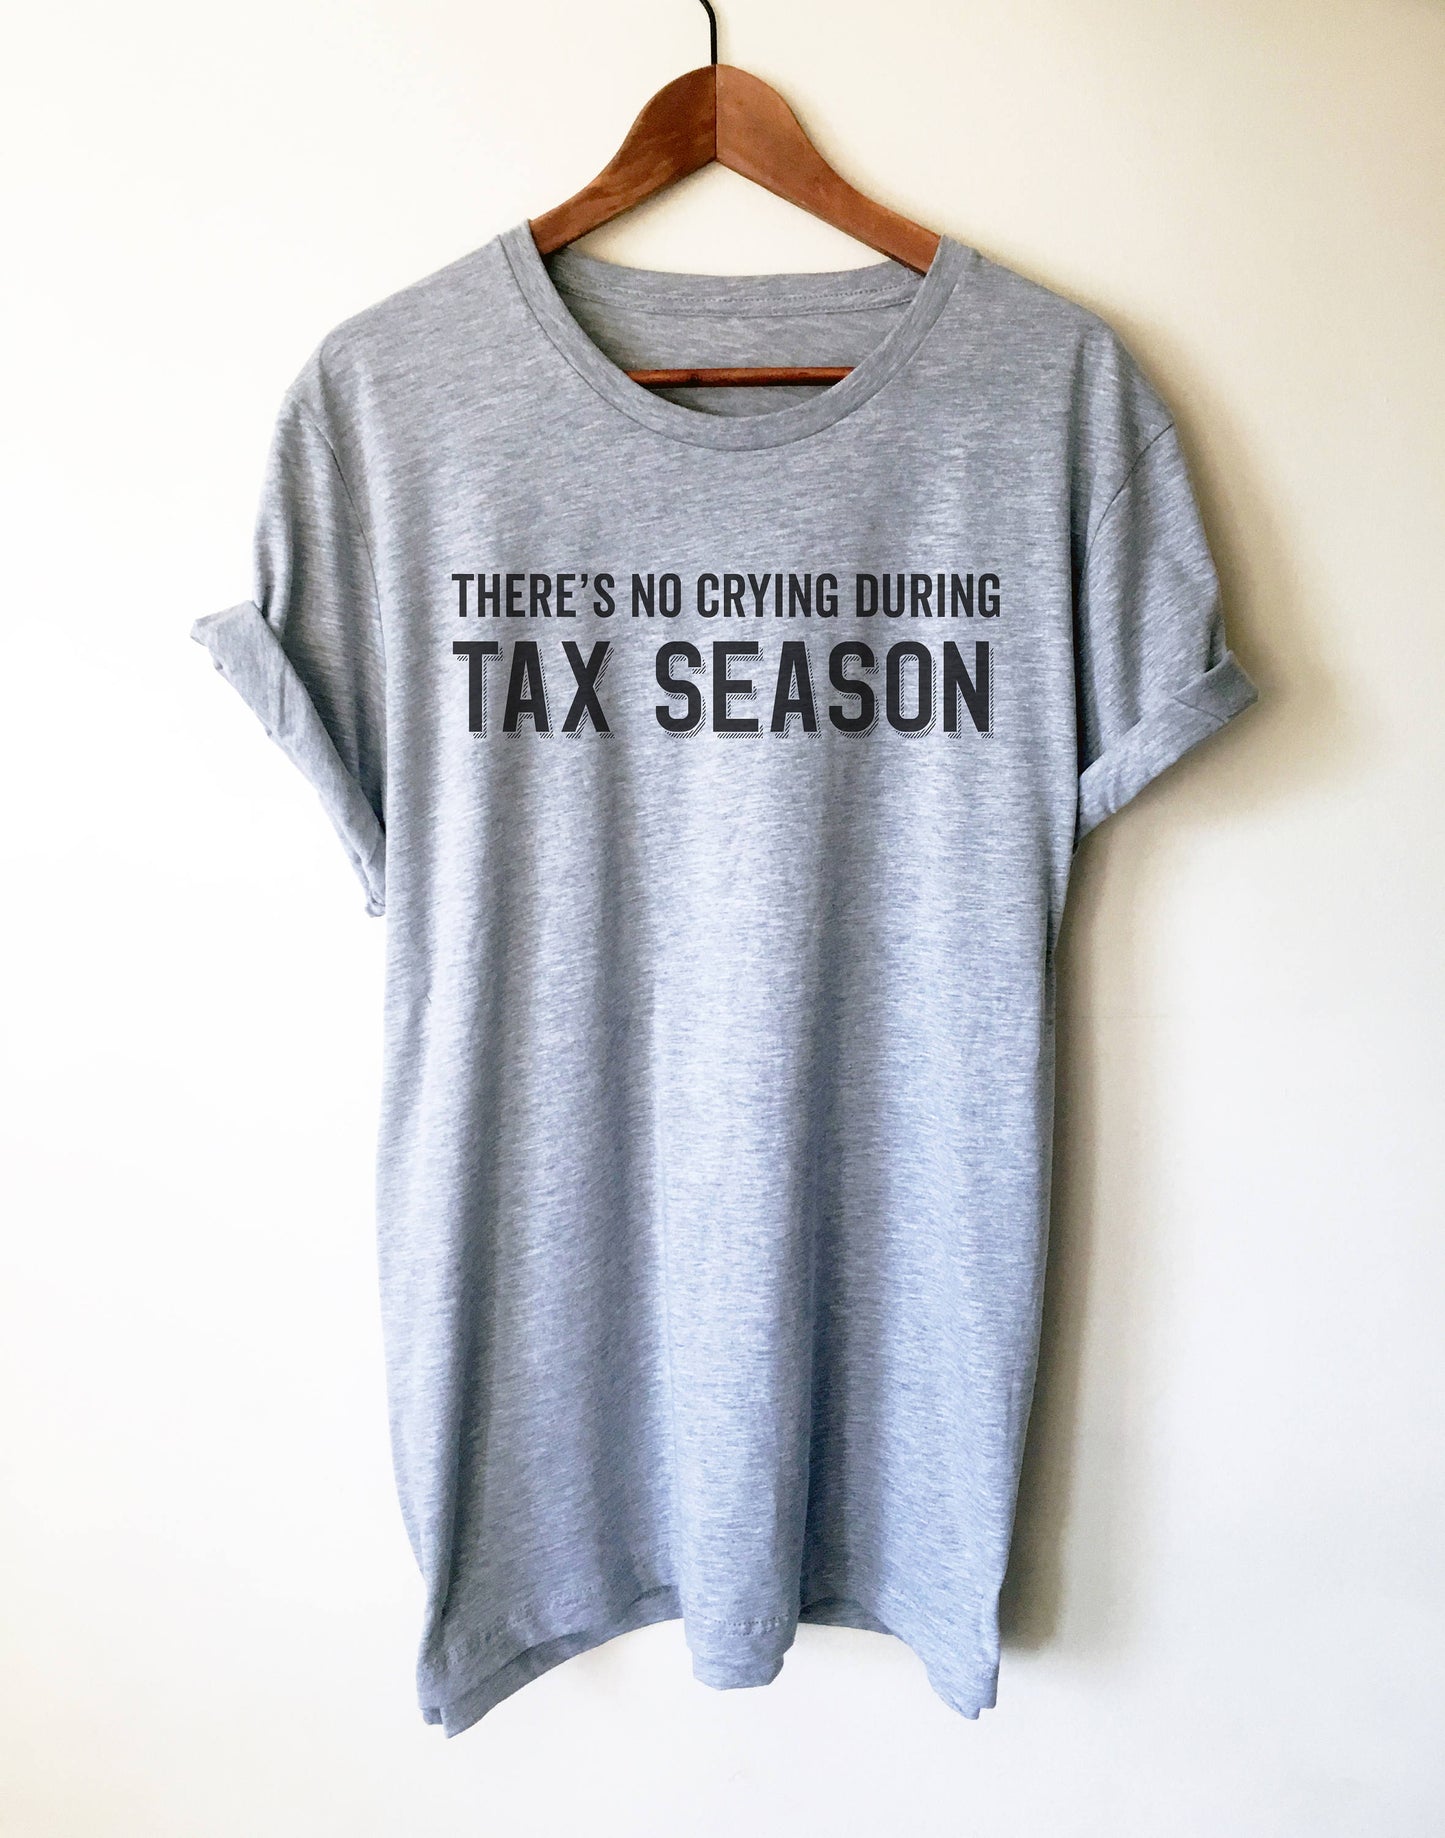 There's No Crying During Tax Season Unisex Shirt - Accountant Shirt, Accountant Gift, Accountant, Accounting Degree, Accountant Jokes